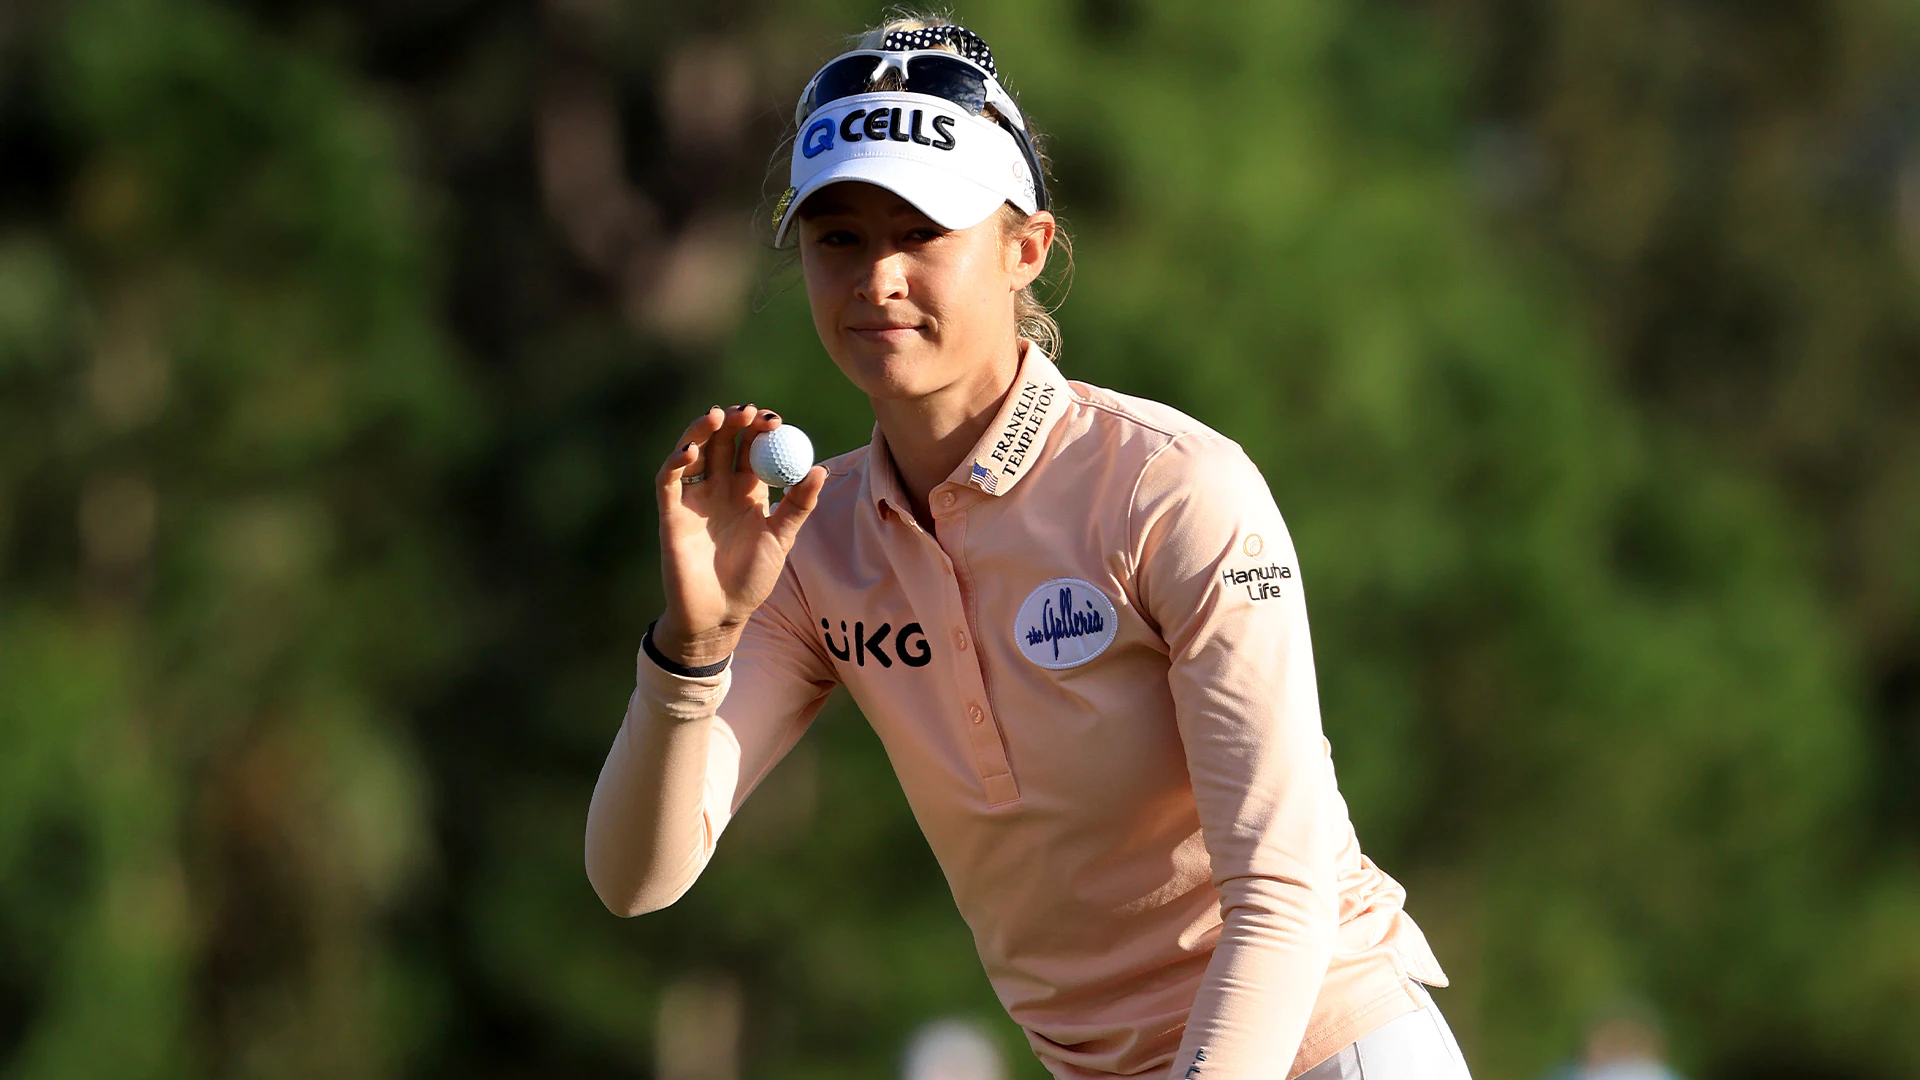 Lexi Thompson, Nelly Korda heading into Pelican Championship finale tied for lead